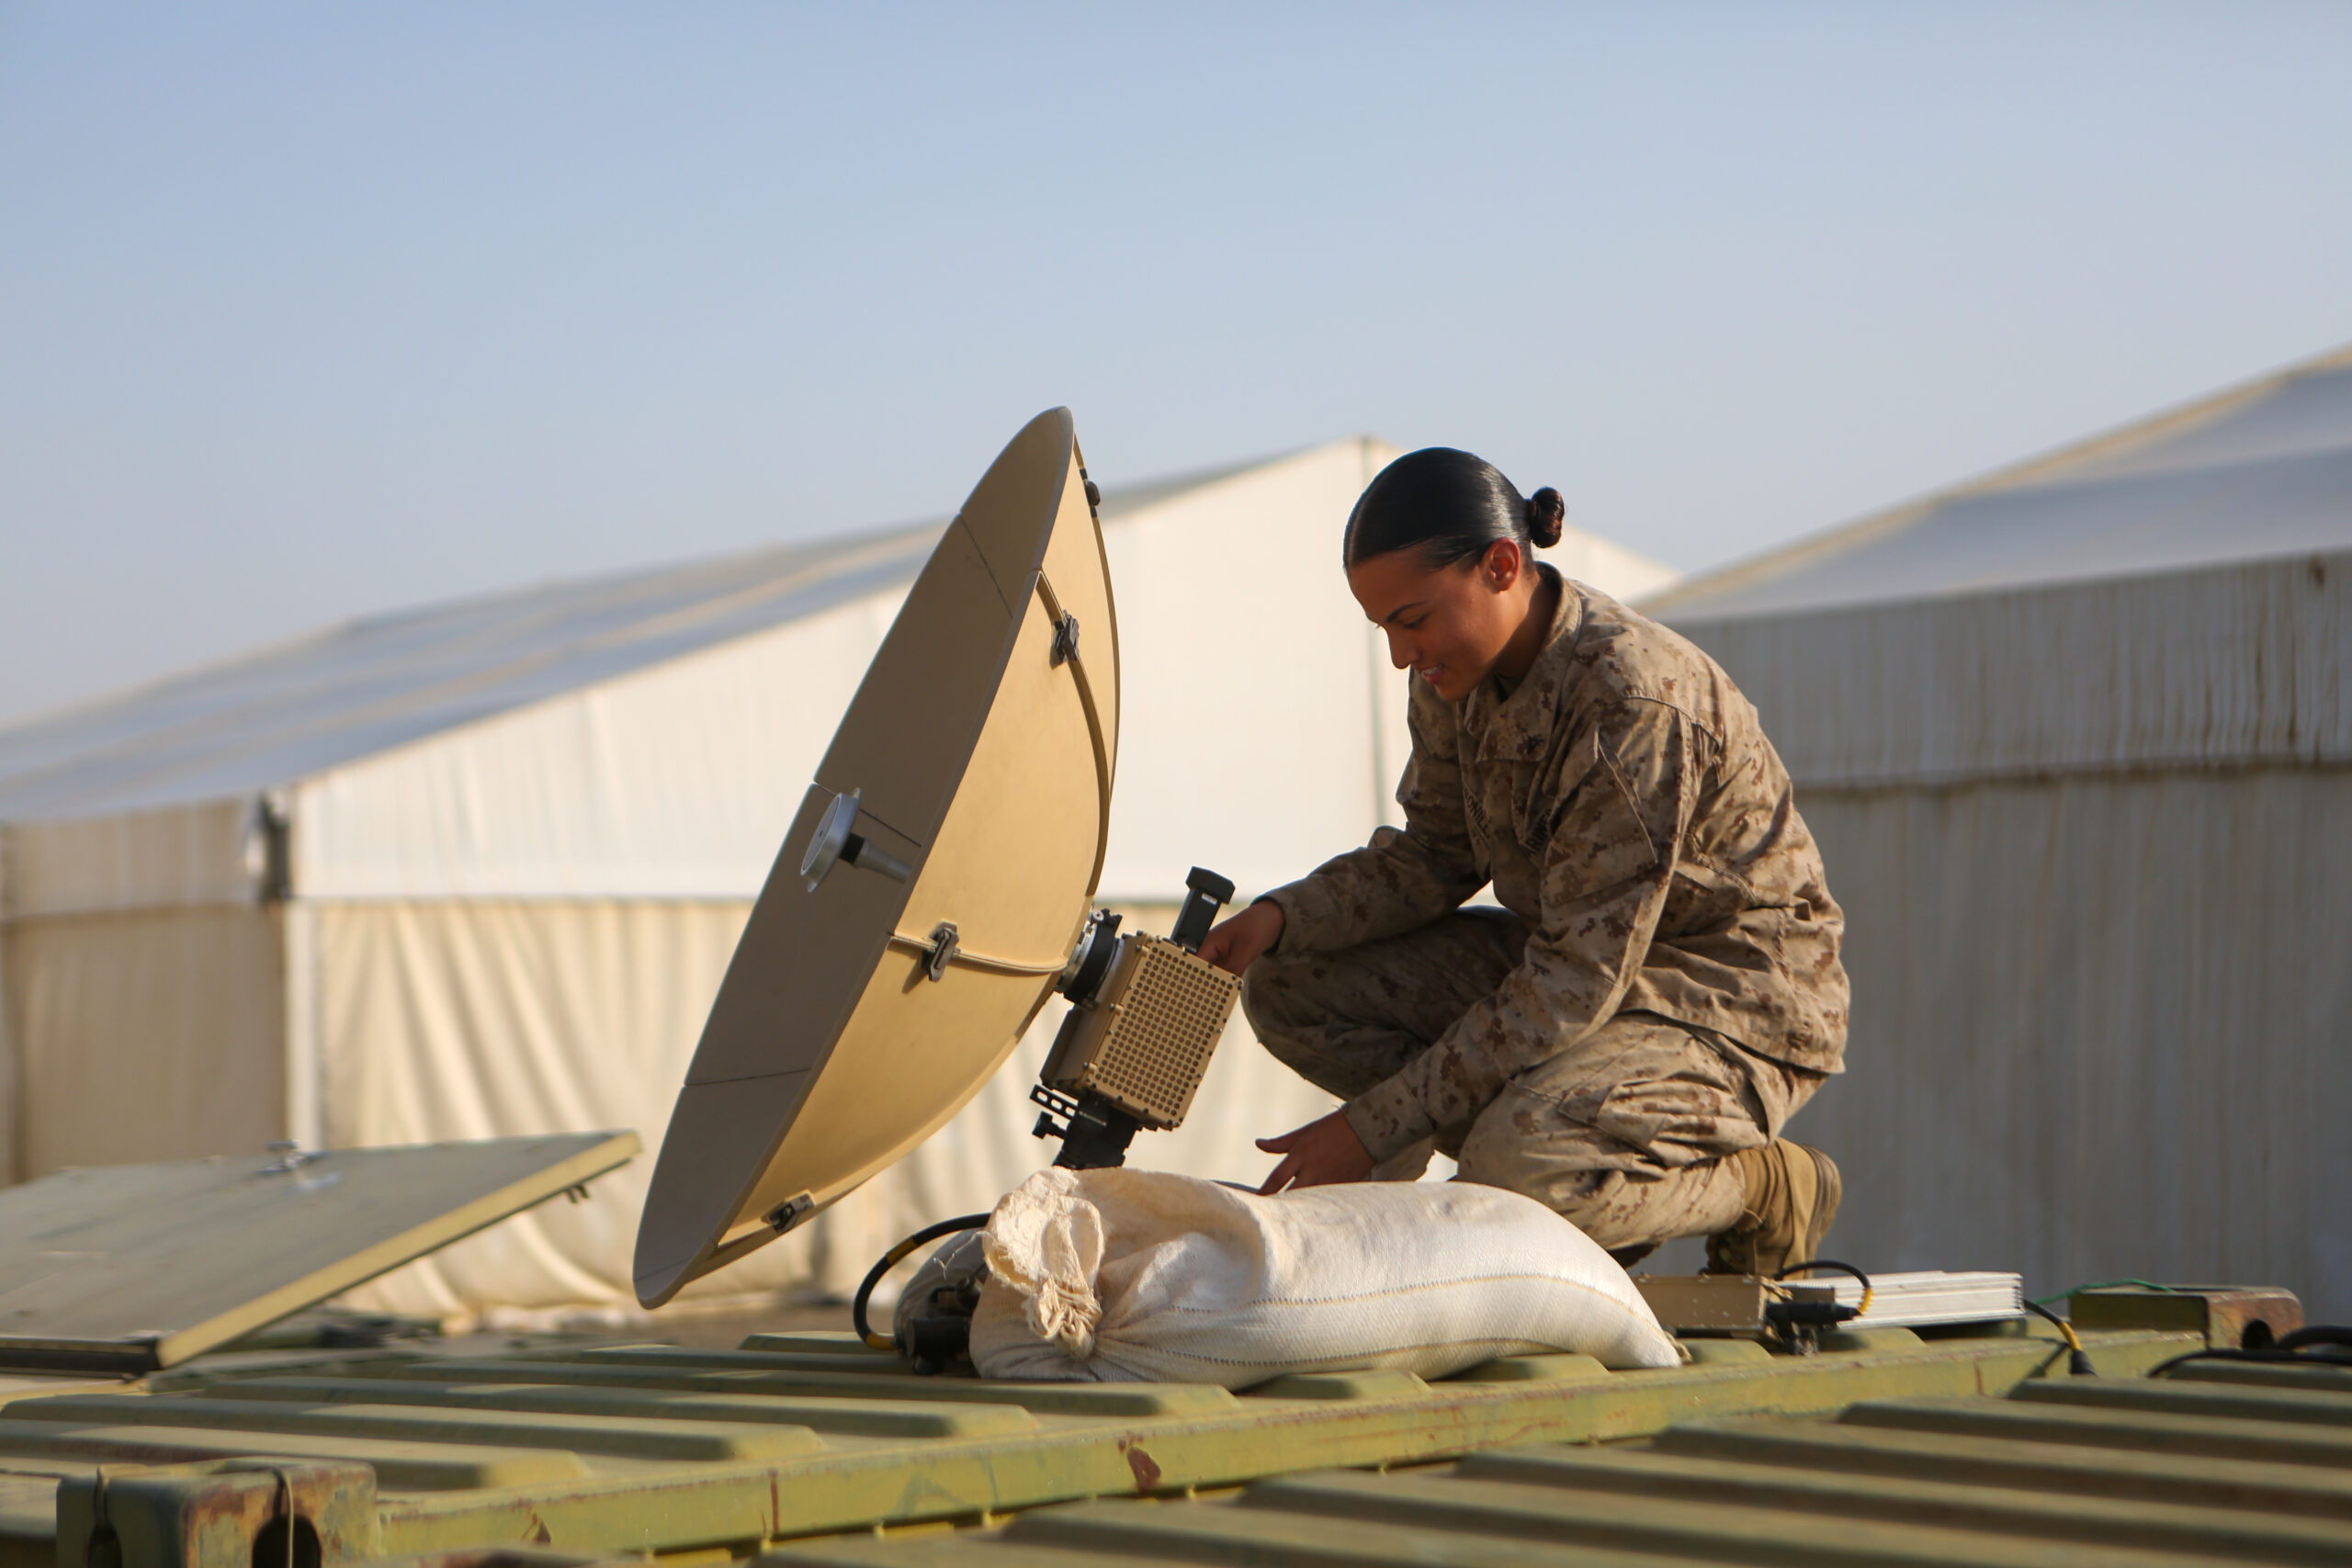 U.S. Marine Corps Lance Cpl. Yerika Zayasbonilla, a data systems administrator with Combat Logistics Regiment 1, 1st Marine Logistics Group, adjusts the satellite on the Marine Corps Wideband Satellite Communications - Expeditionary during exercise Native Fury 22 at a Logistics Support Area established in the Kingdom of Saudi Arabia, Aug. 21, 2022. Native Fury 22 is a biennial exercise focused on the demonstration of the rapid offload and integration of a Maritime Prepositioned Force in the U.S. Central Command area of responsibility in support of regional security, crisis response, and contingency operations. (U.S. Marine Corps photo by Sgt. Alize Sotelo)